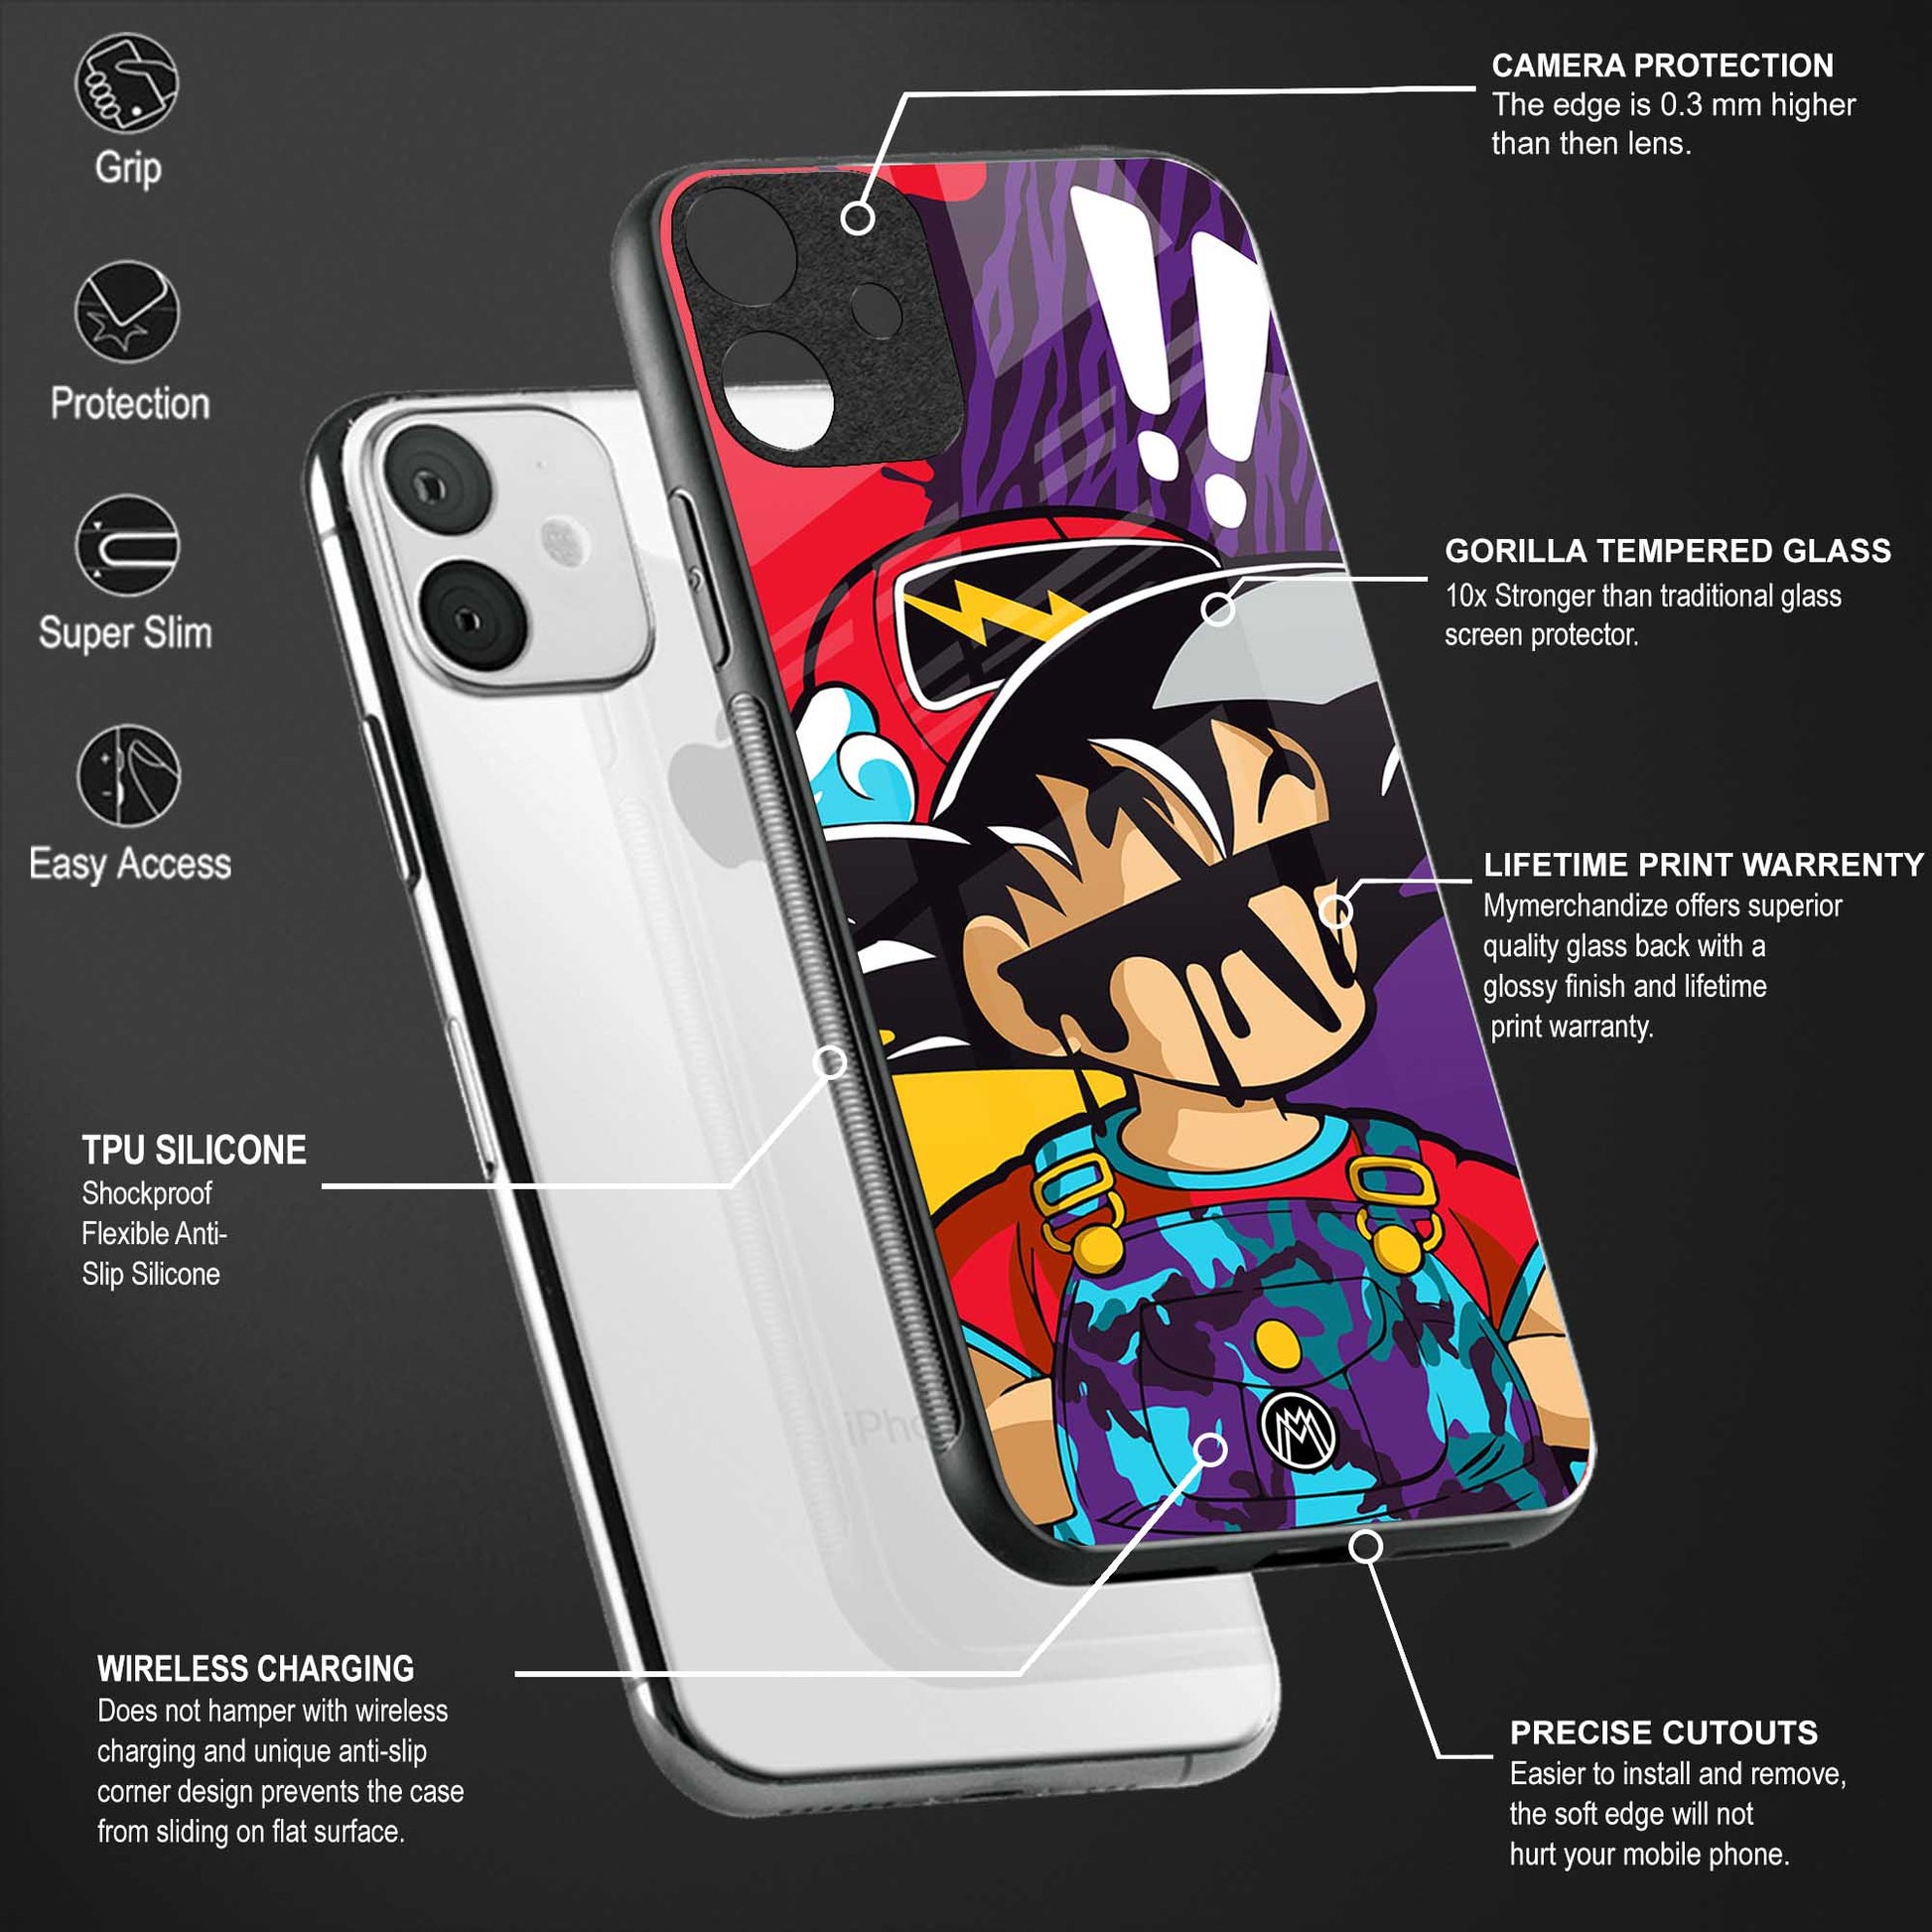 dragon ball z art phone cover for samsung galaxy note 9